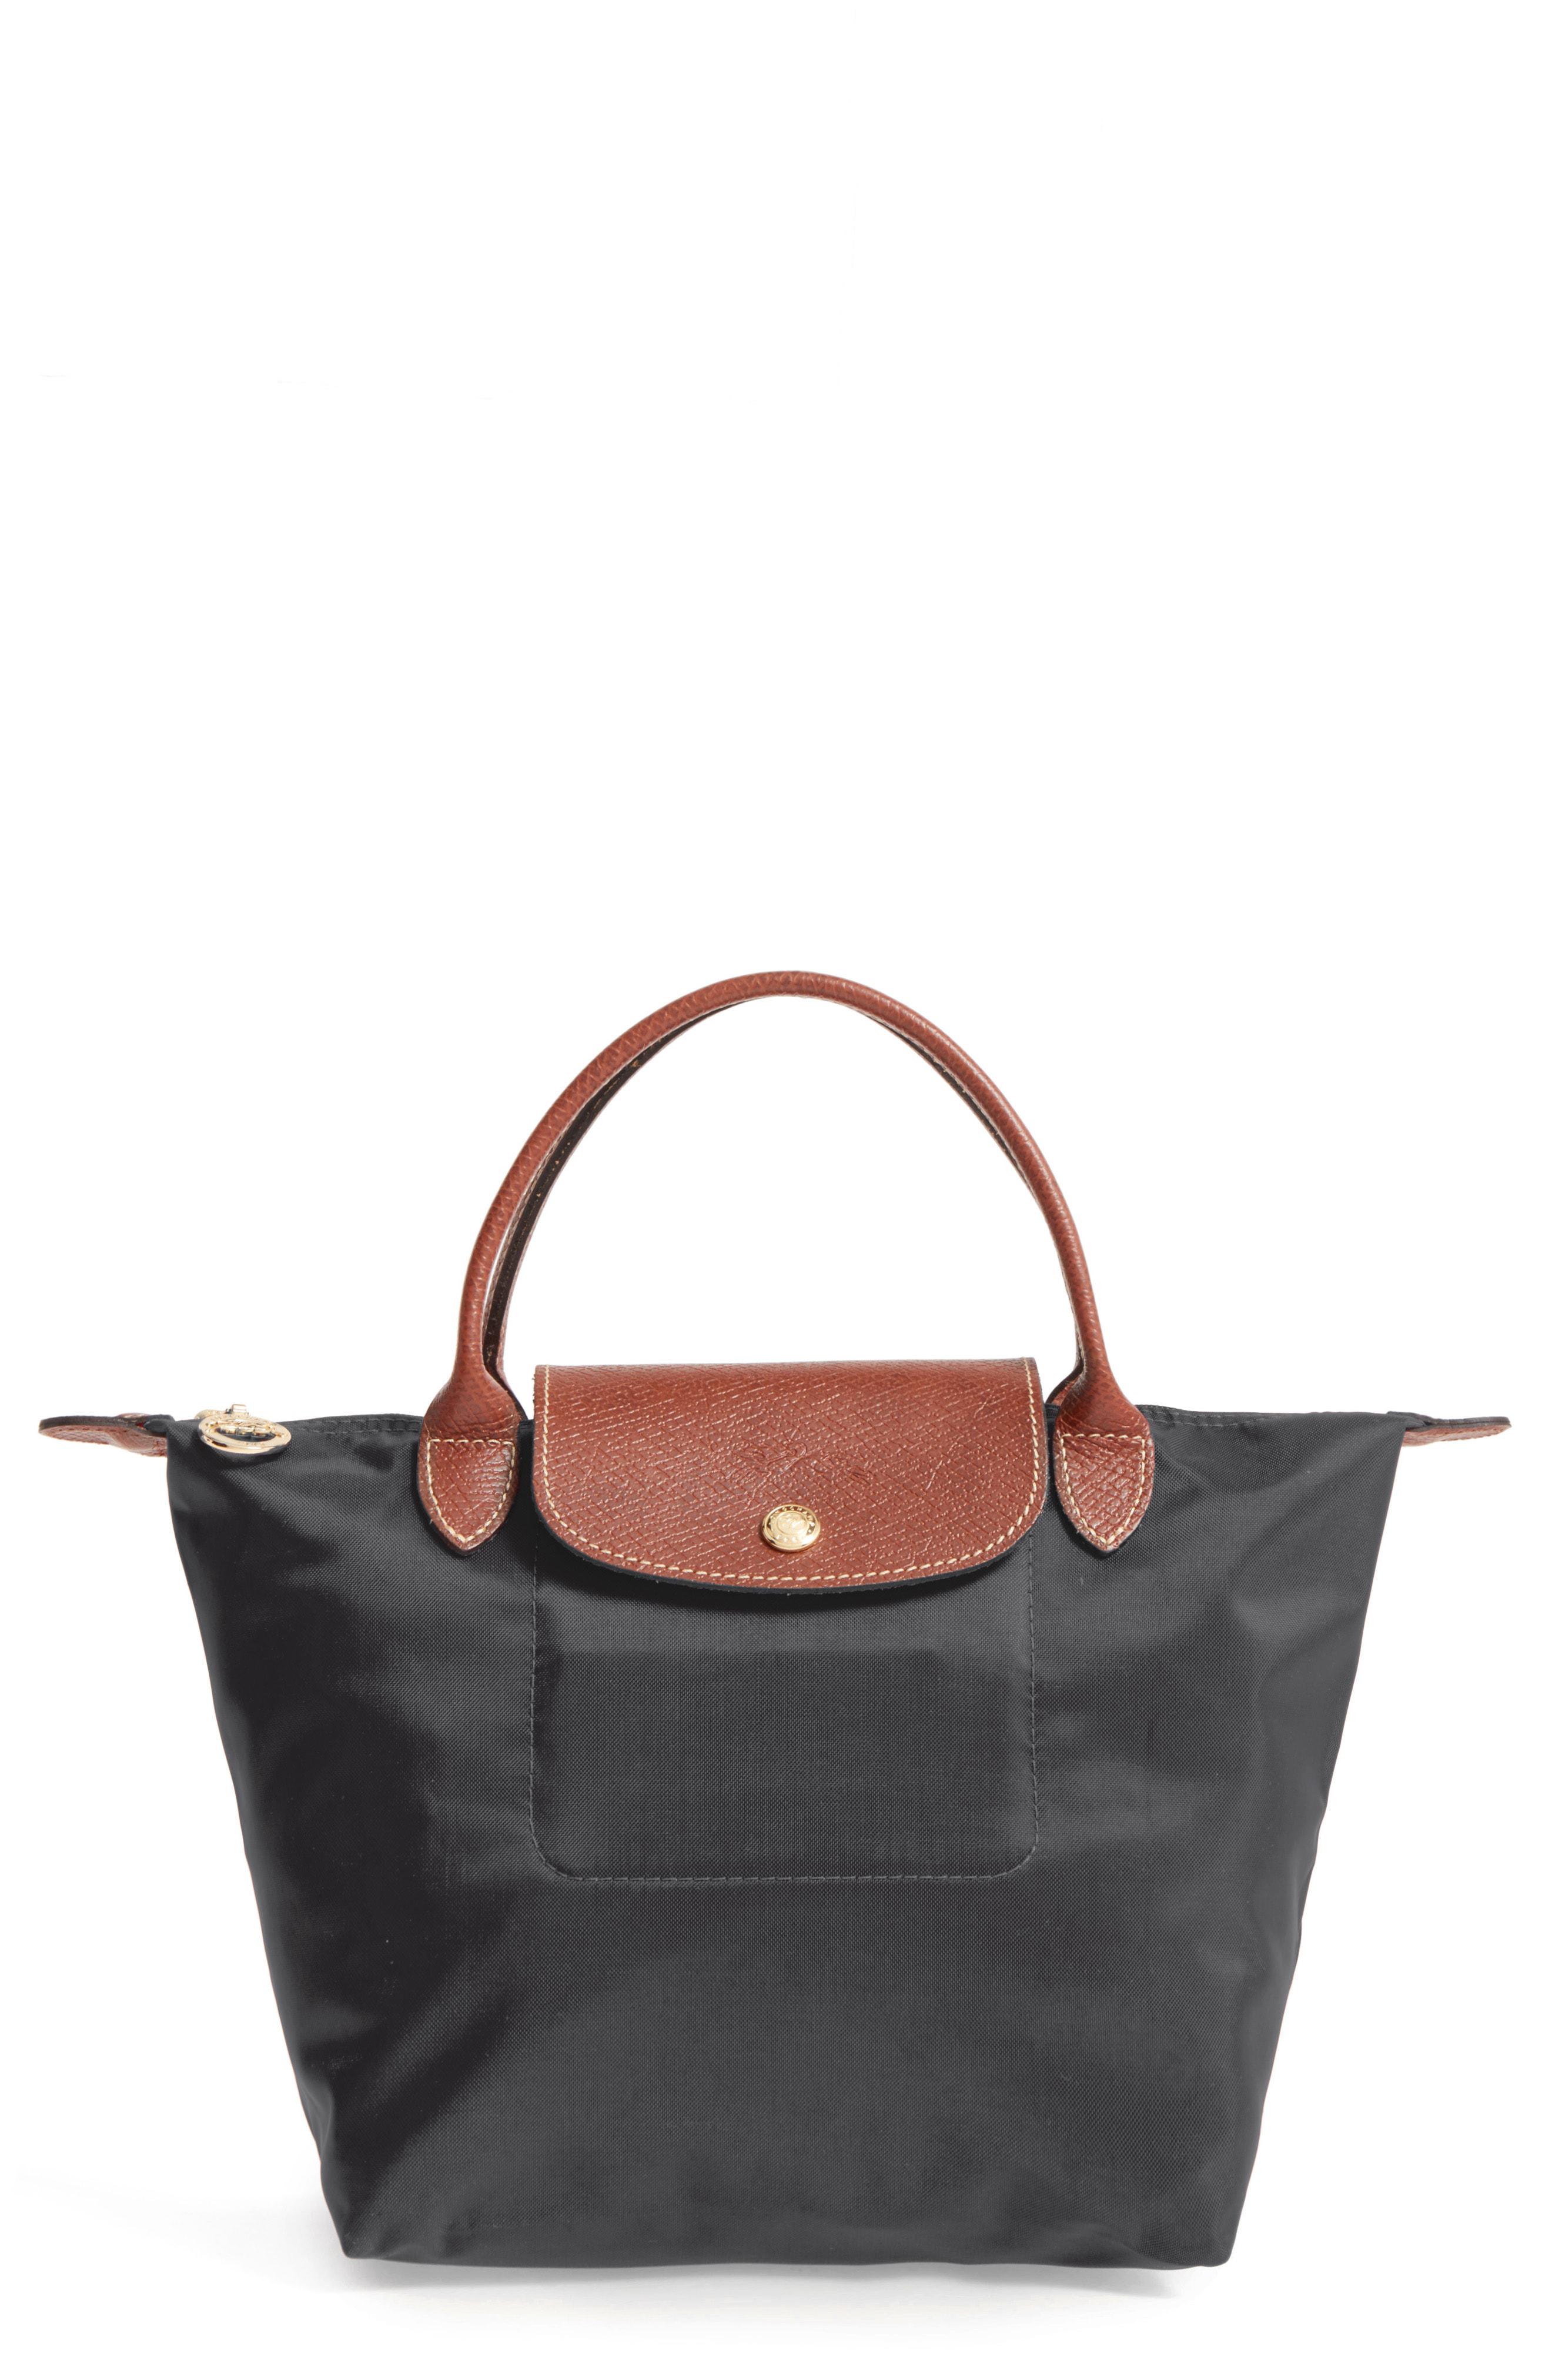 Lyst - Longchamp 'small Le Pliage' Top Handle Tote in Black